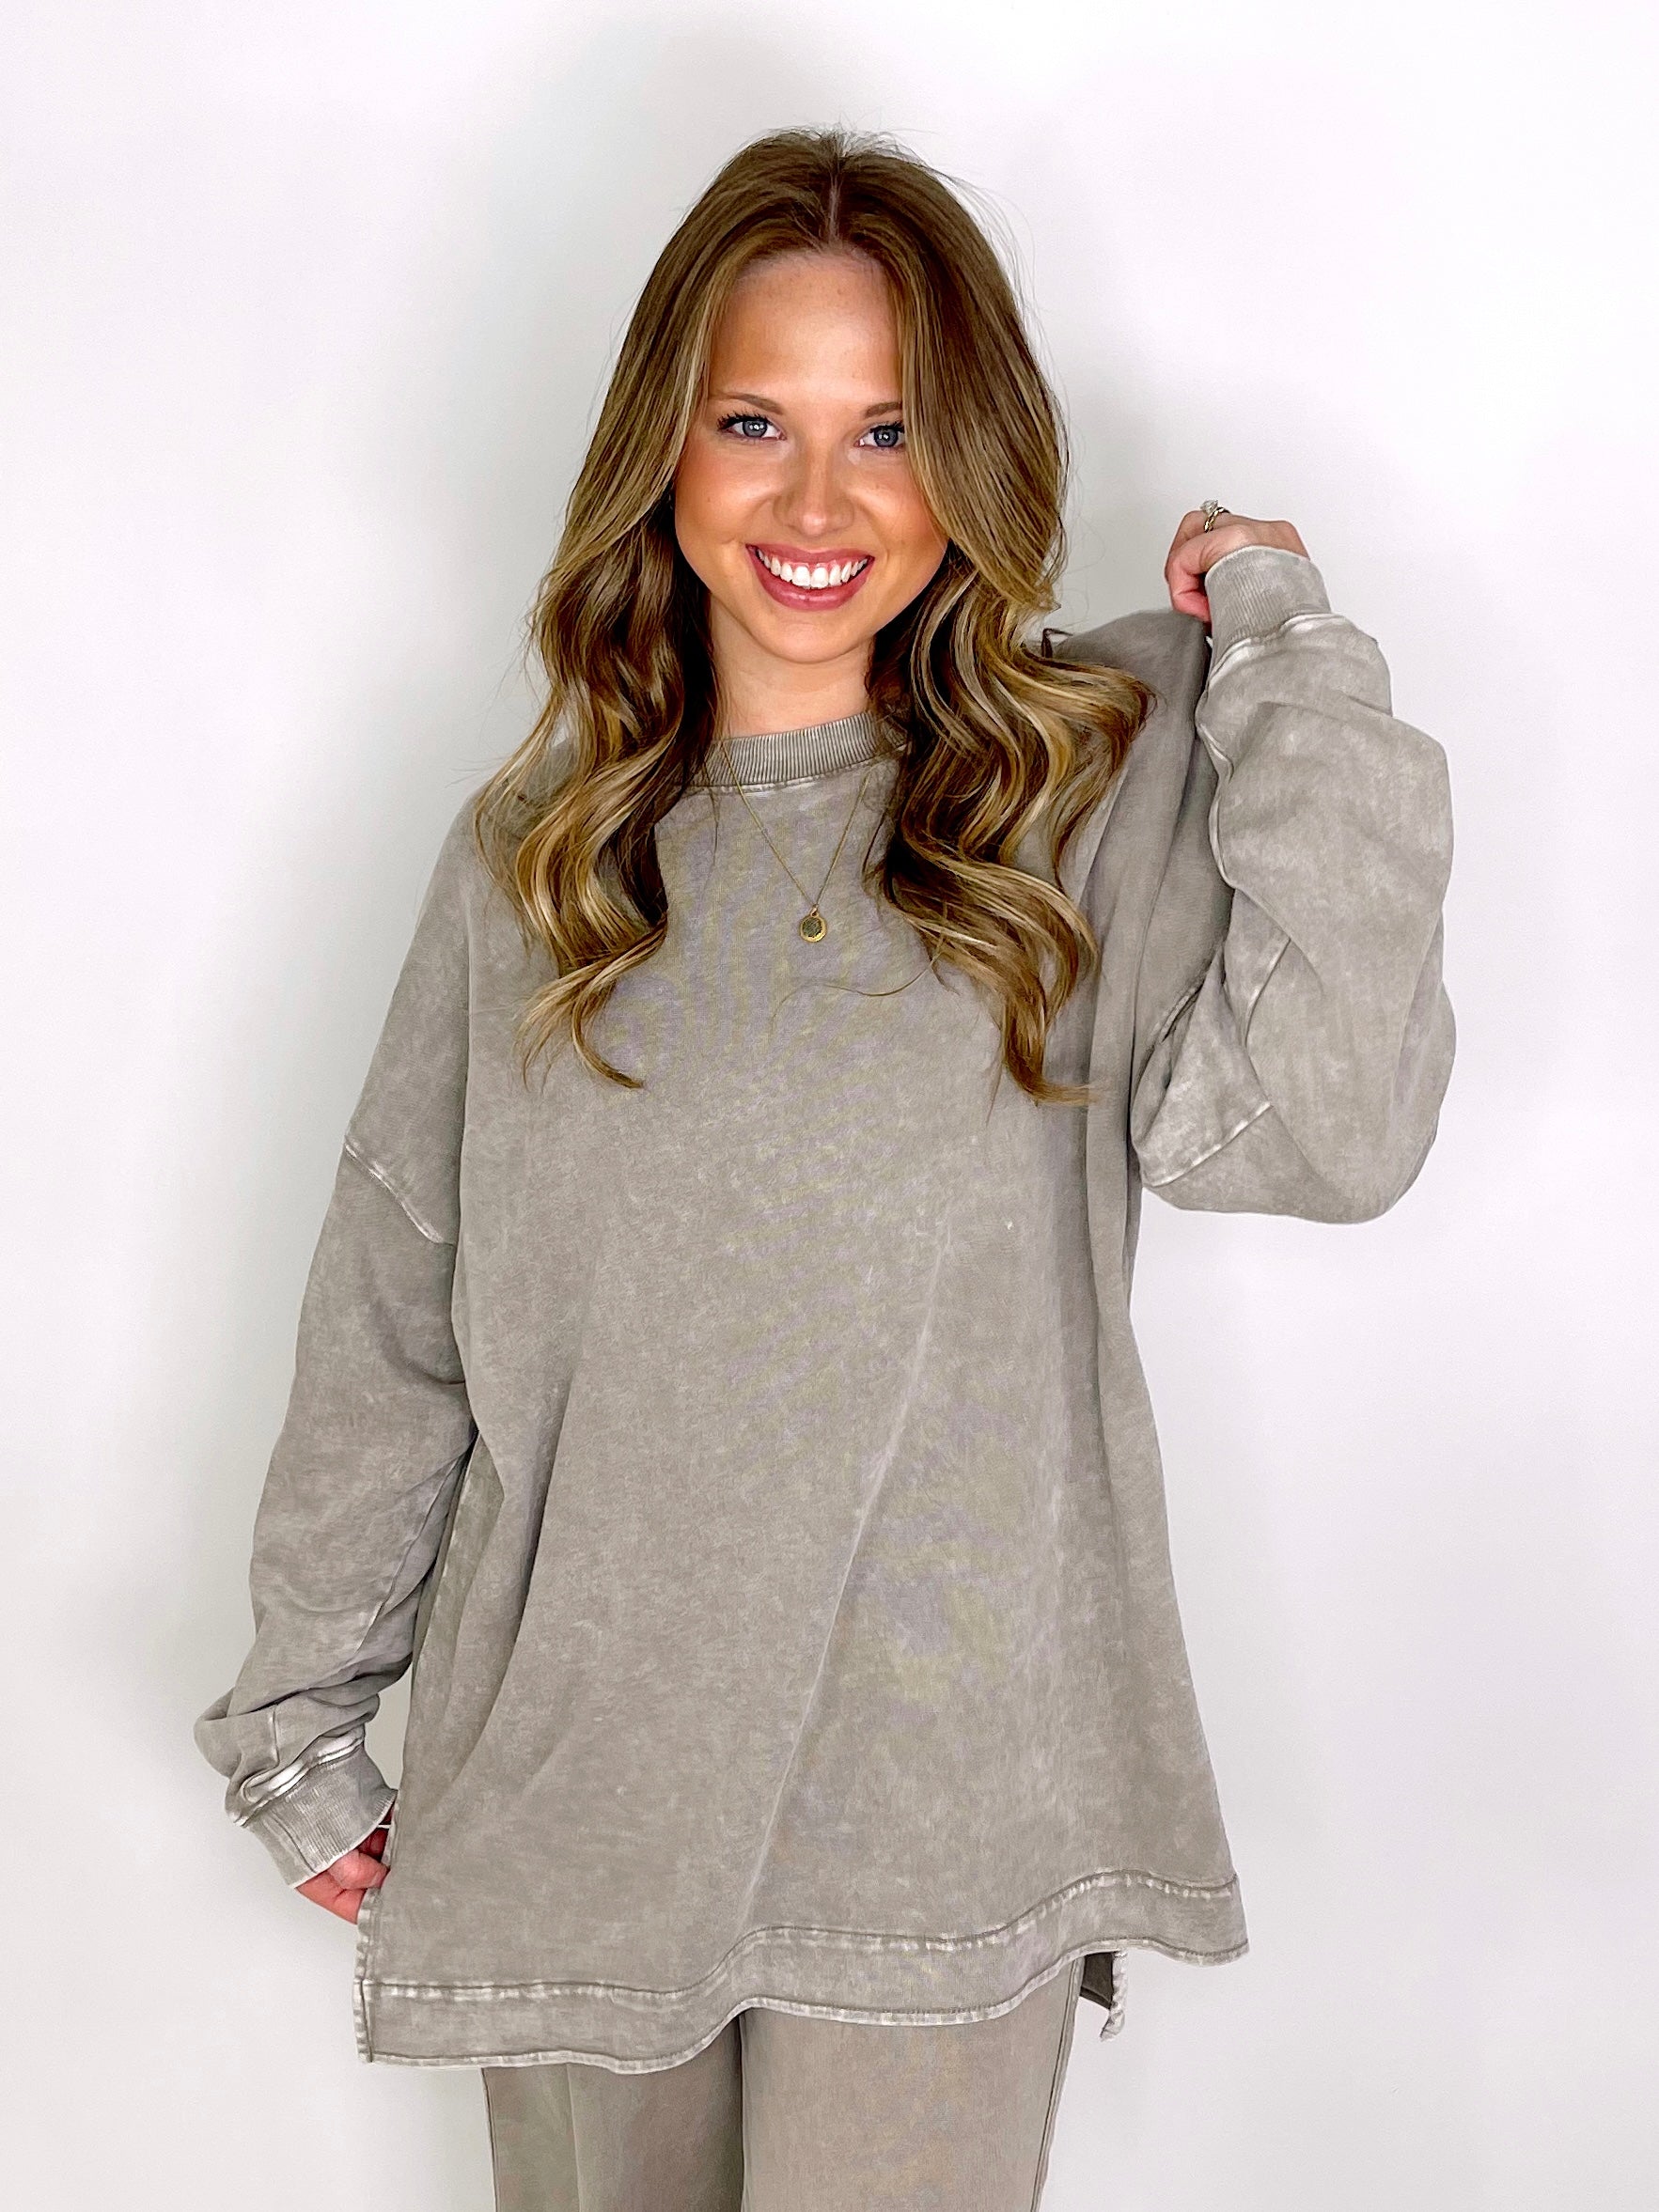 The Lottie Top-Long Sleeves-Easel-The Village Shoppe, Women’s Fashion Boutique, Shop Online and In Store - Located in Muscle Shoals, AL.